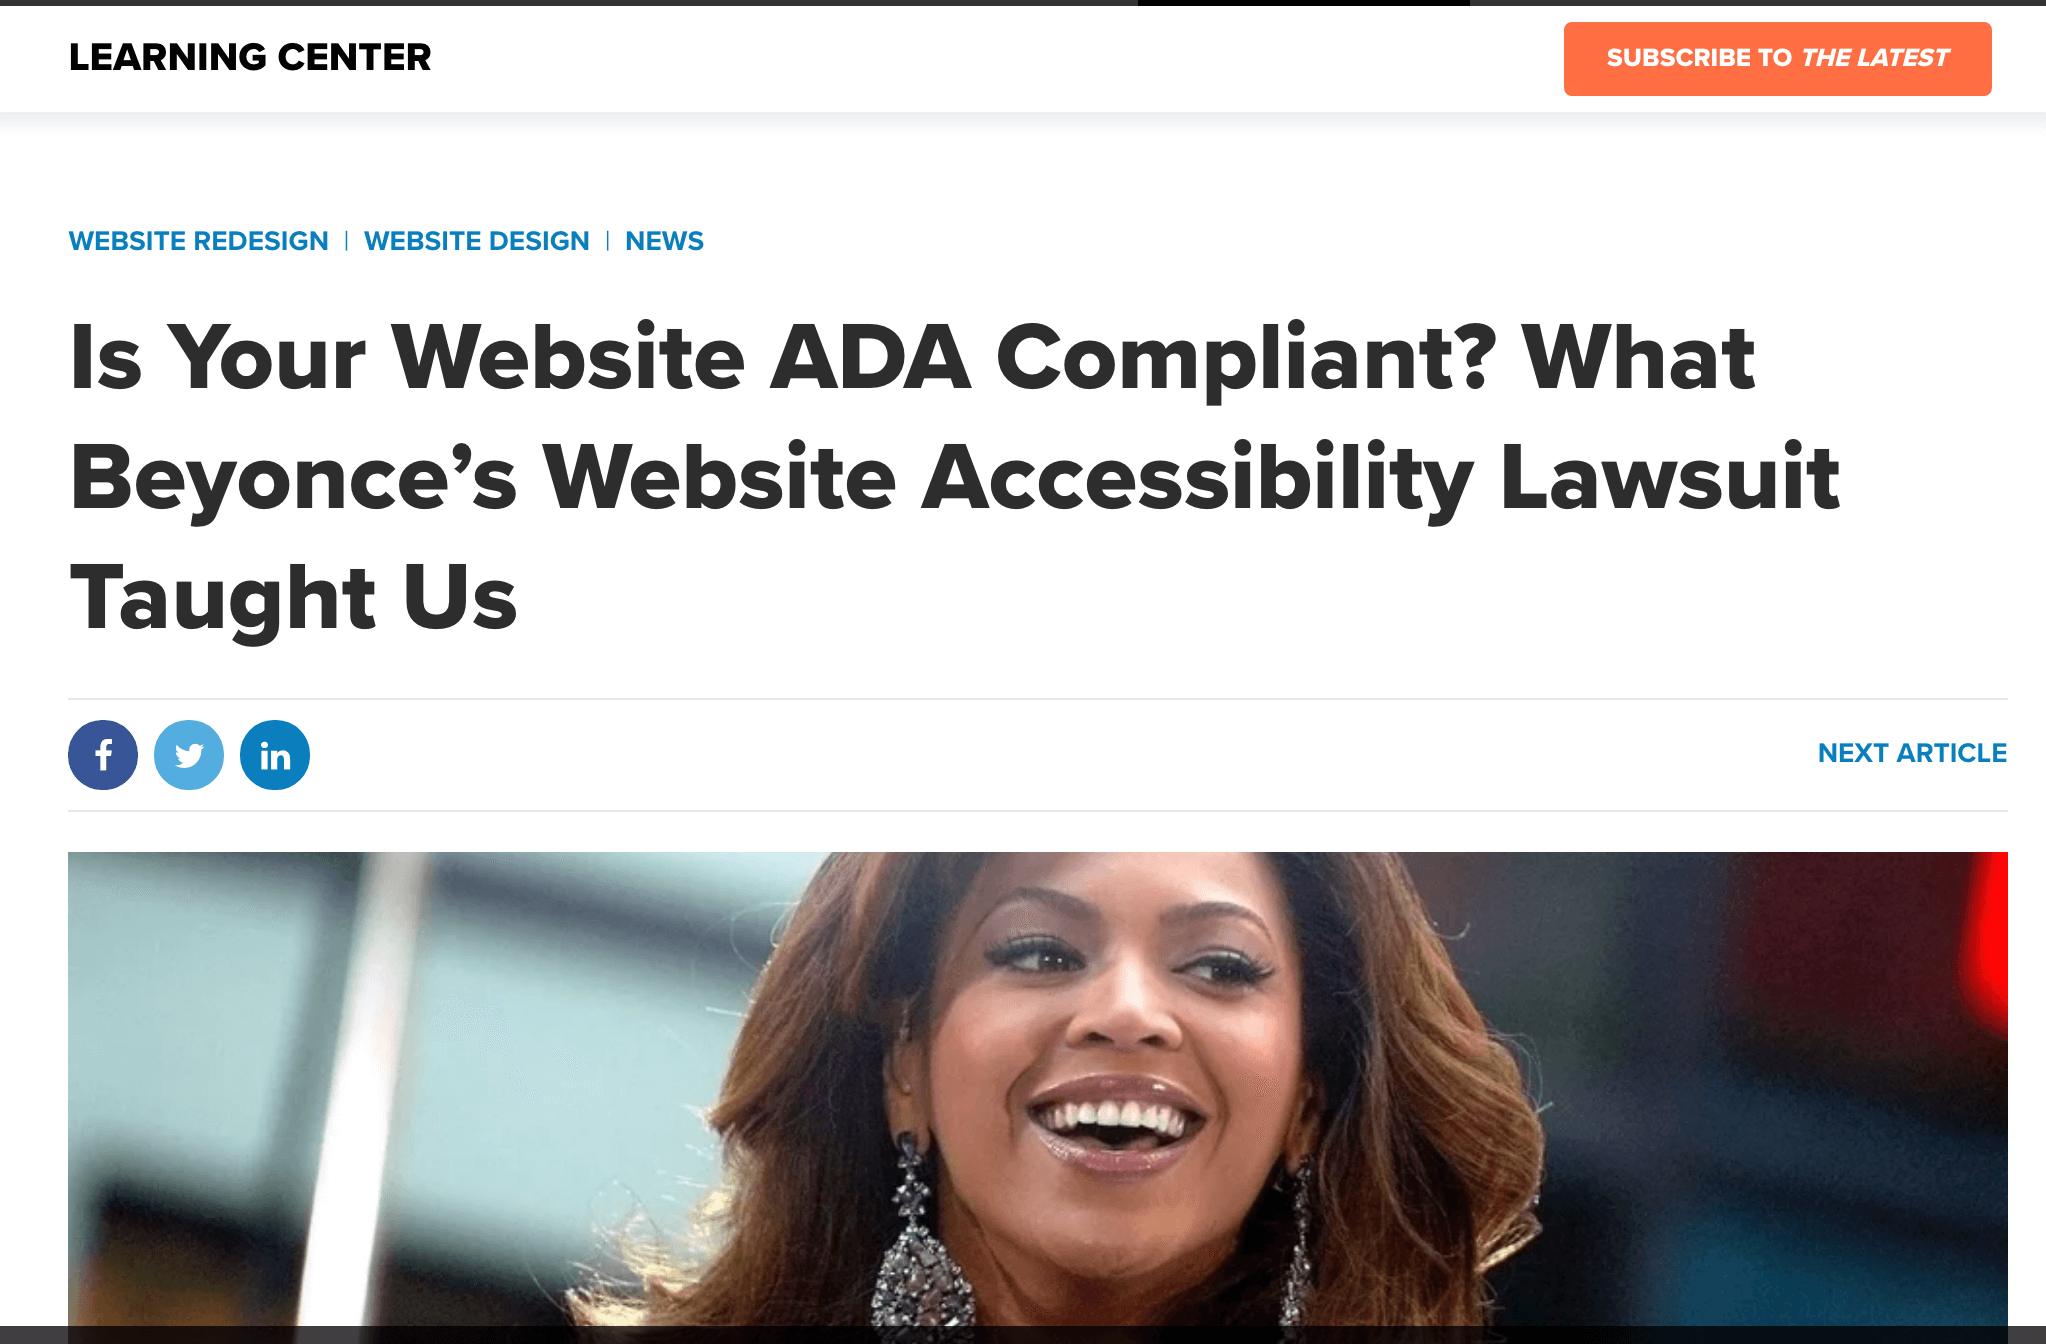 Is Your Website ADA Compliant? What Beyonce's Website Accessibility Lawsuit Taught Us